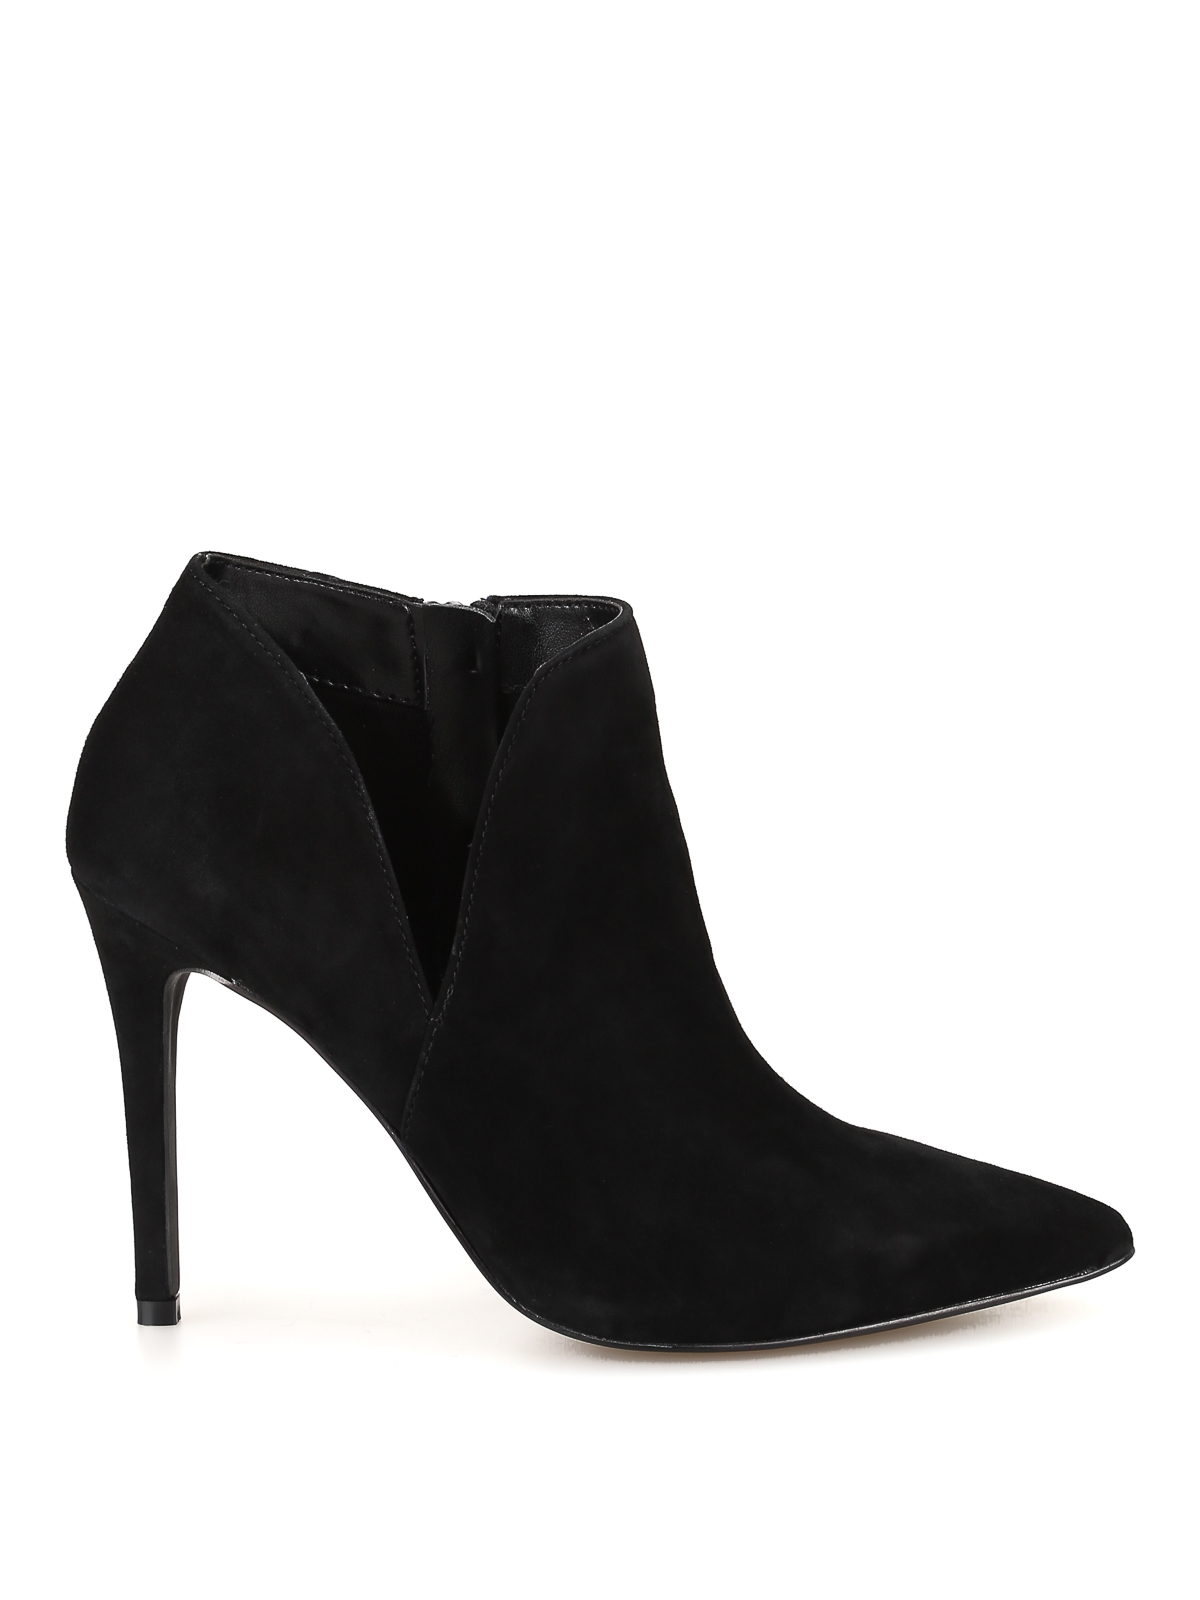 STEVE MADDEN ARIZA ANKLE BOOTS